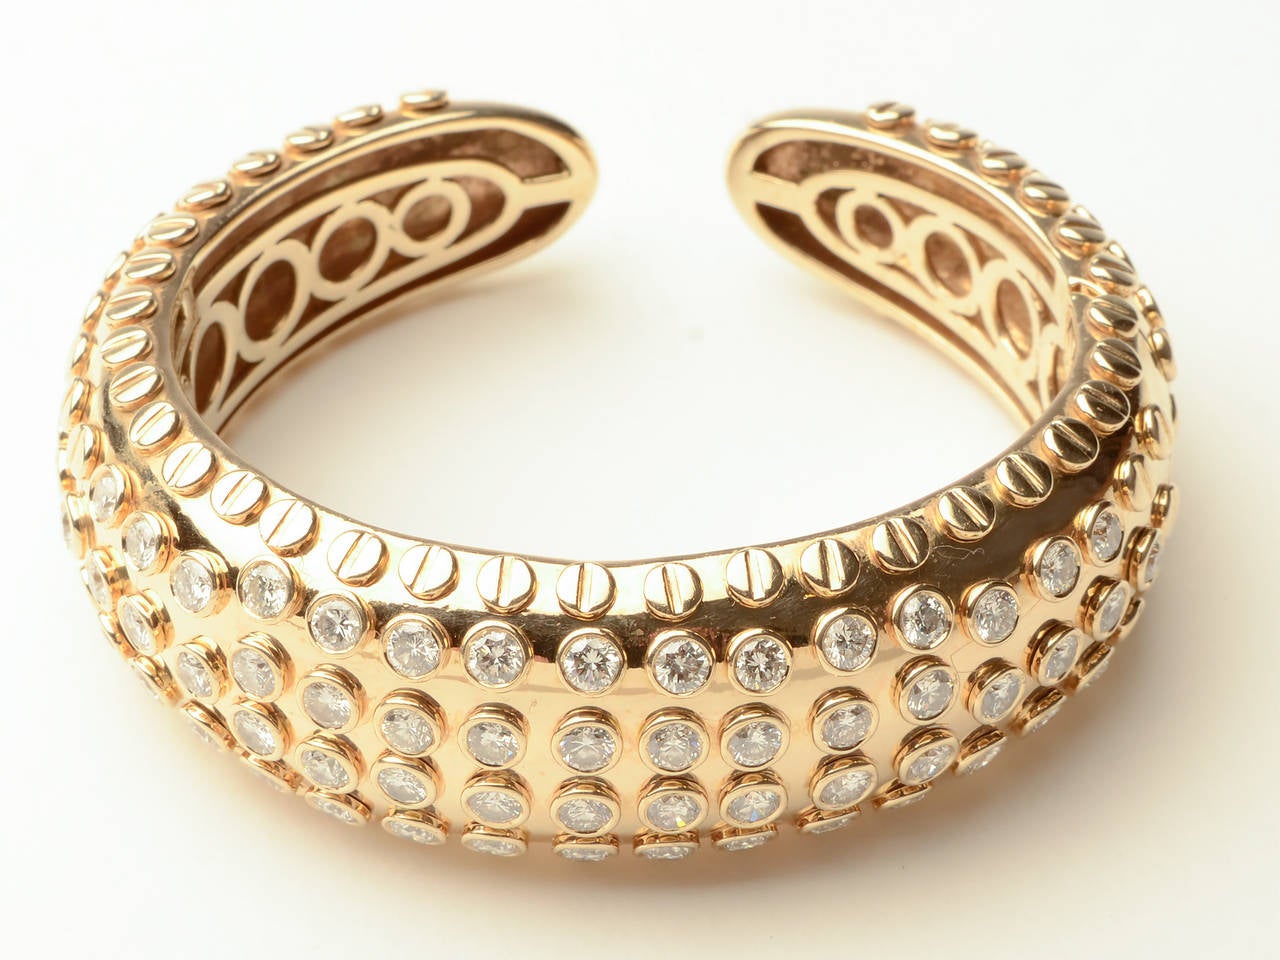 Stunning and unusual cuff bracelet by Sonia B. It is filled with more than 5 carats of diamonds that are surrounded by raised gold circles.  It has a clever invisible hinge so it is easy to slip on and fits a variety of wrist sizes. The inner